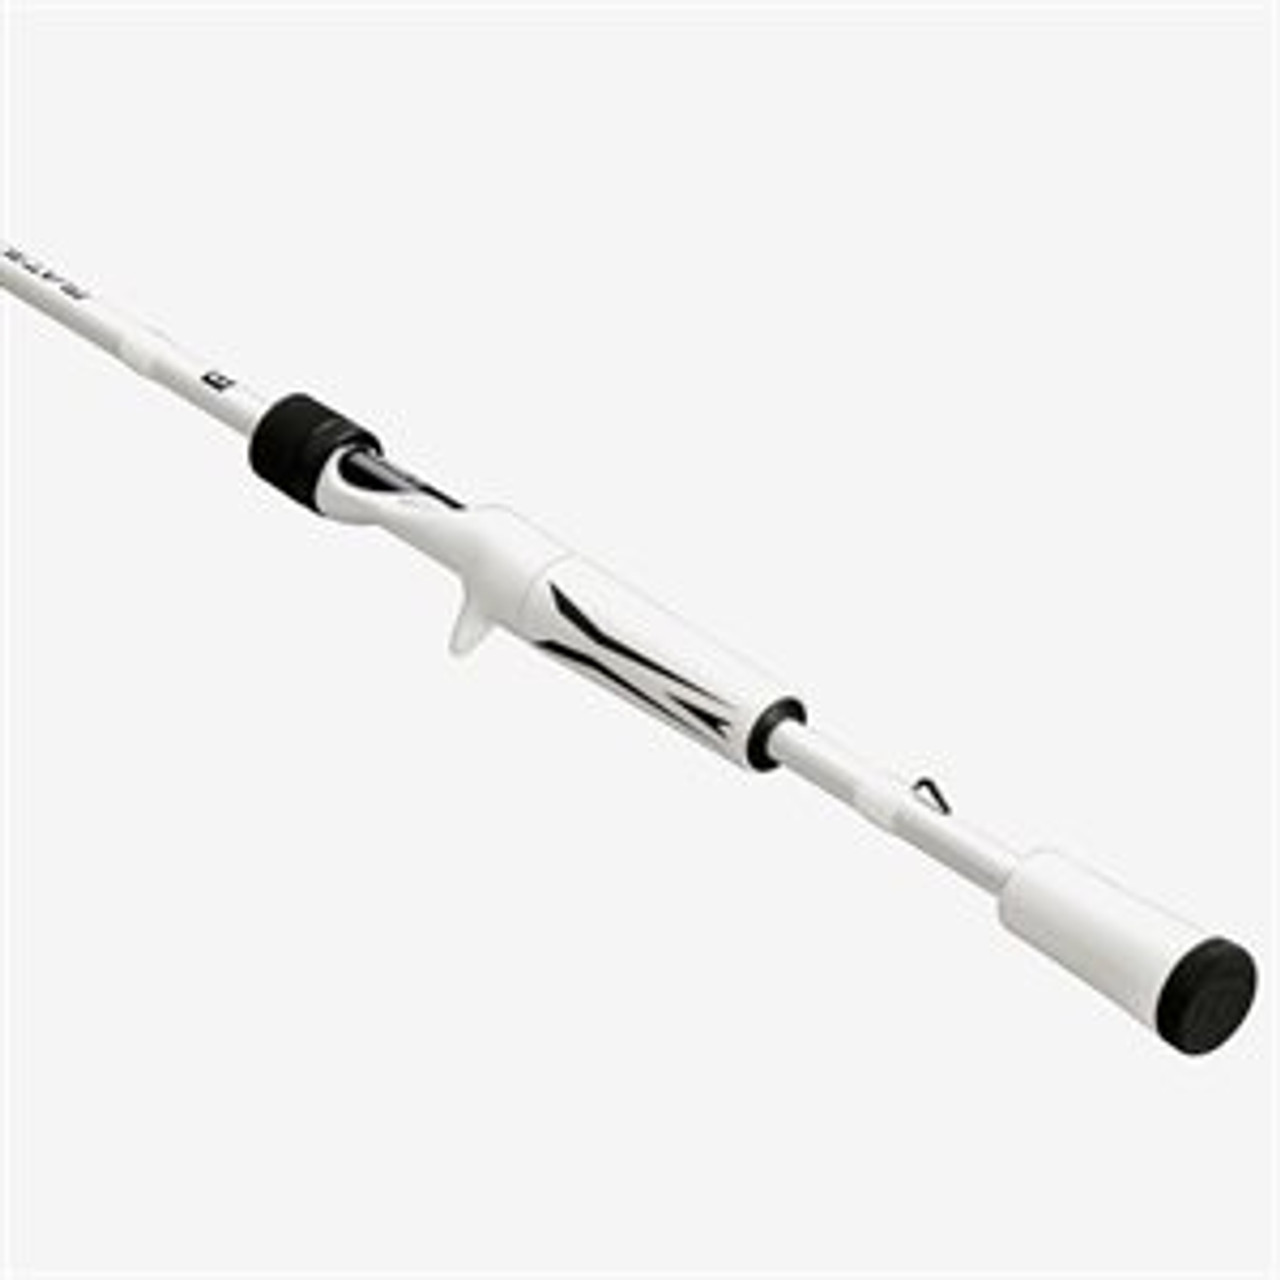 13 Fishing Fate V3 Spinning and Casting Rod